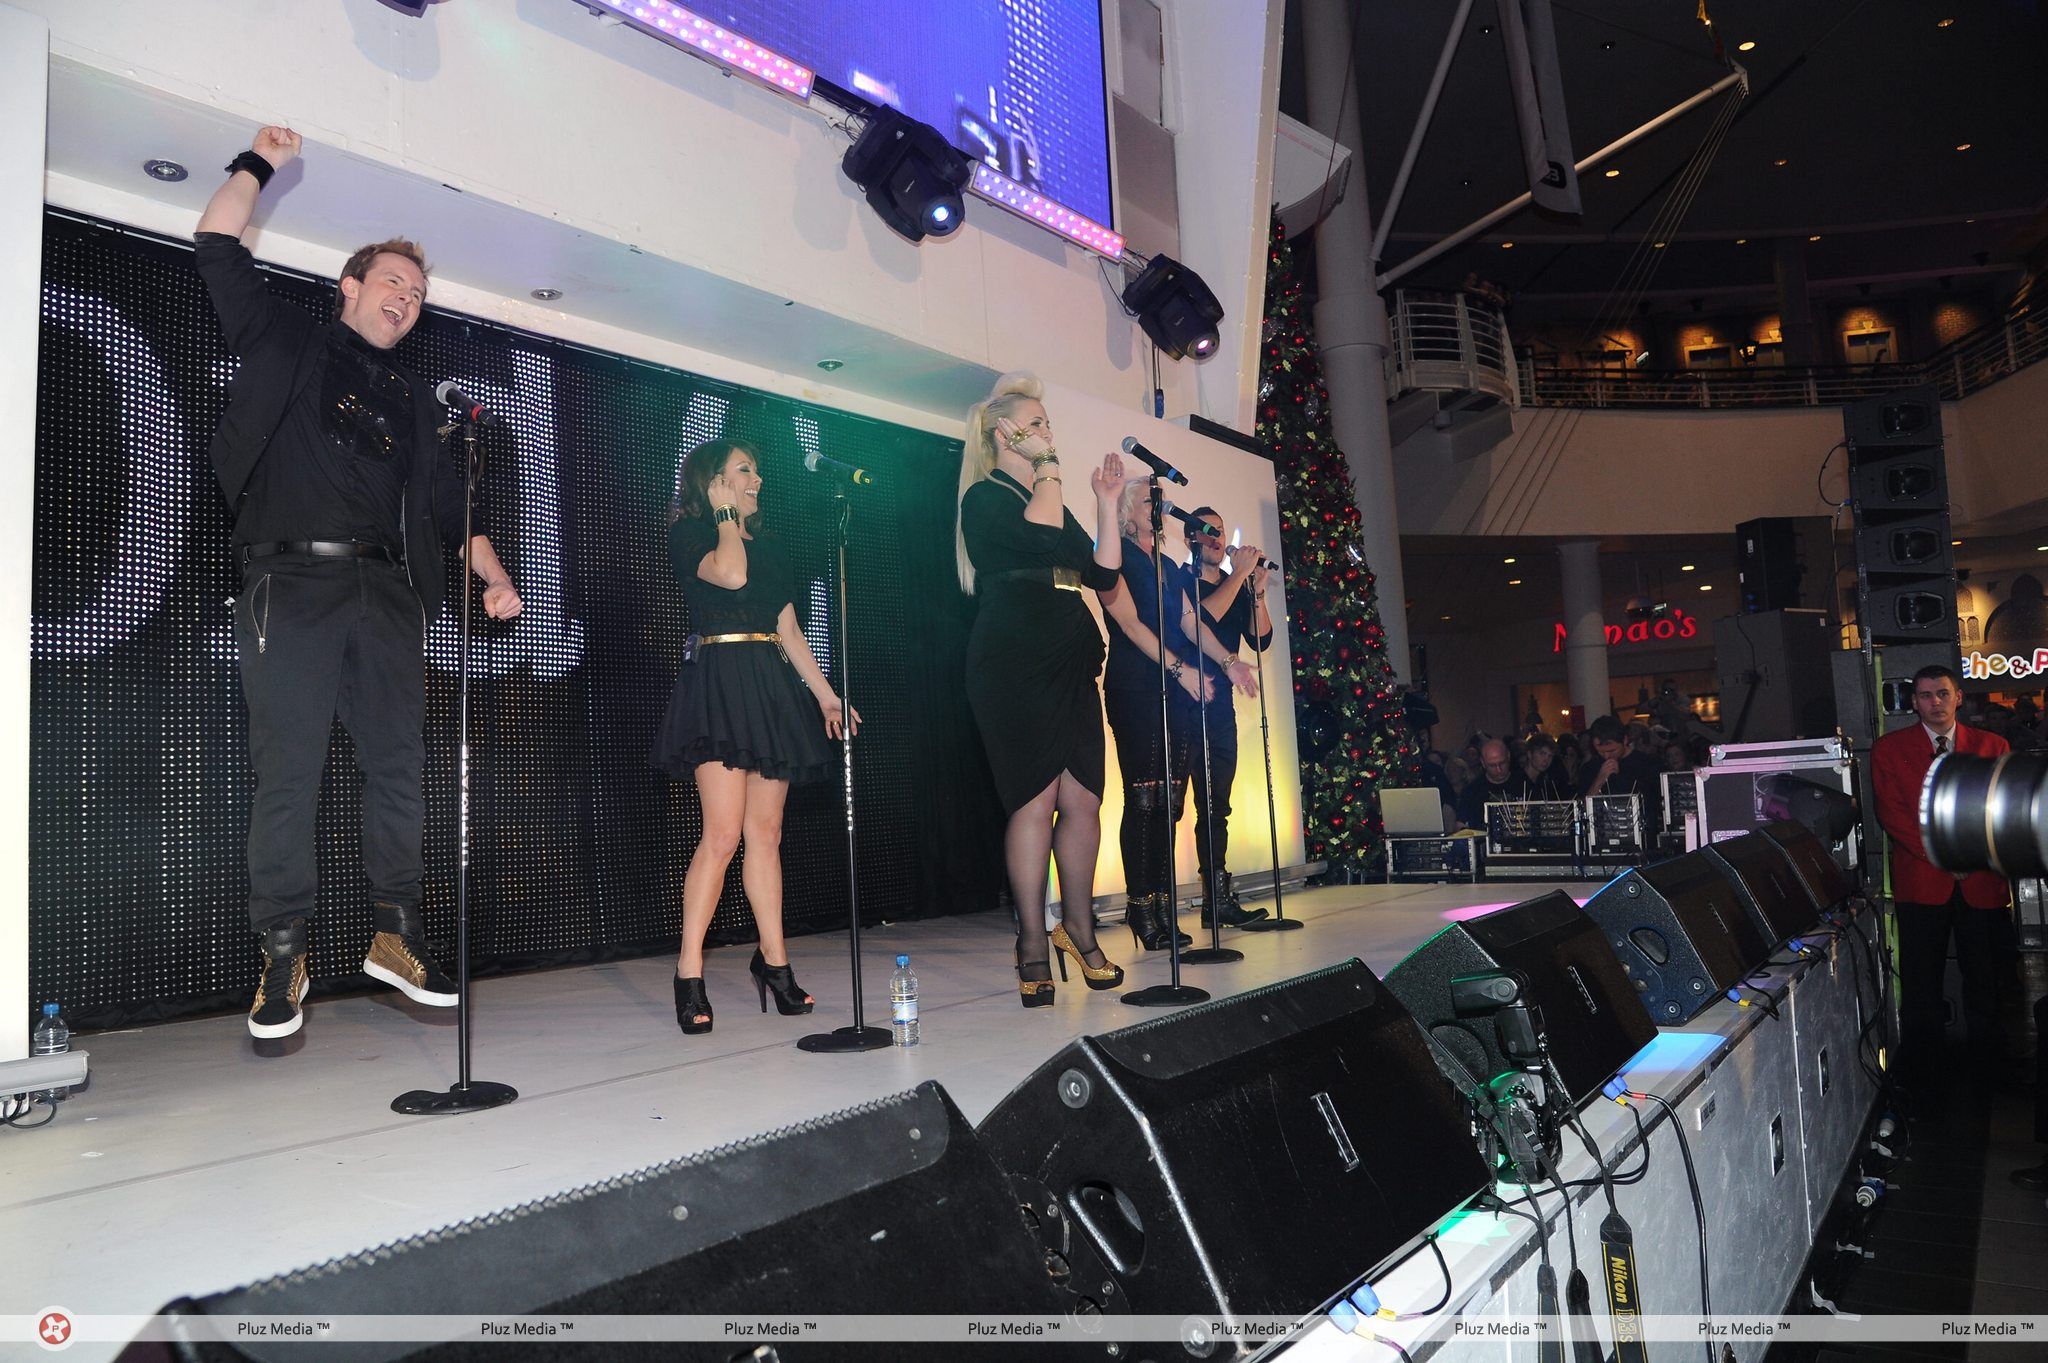 Steps' performs live at the Trafford centre in Manchester | Picture 111518